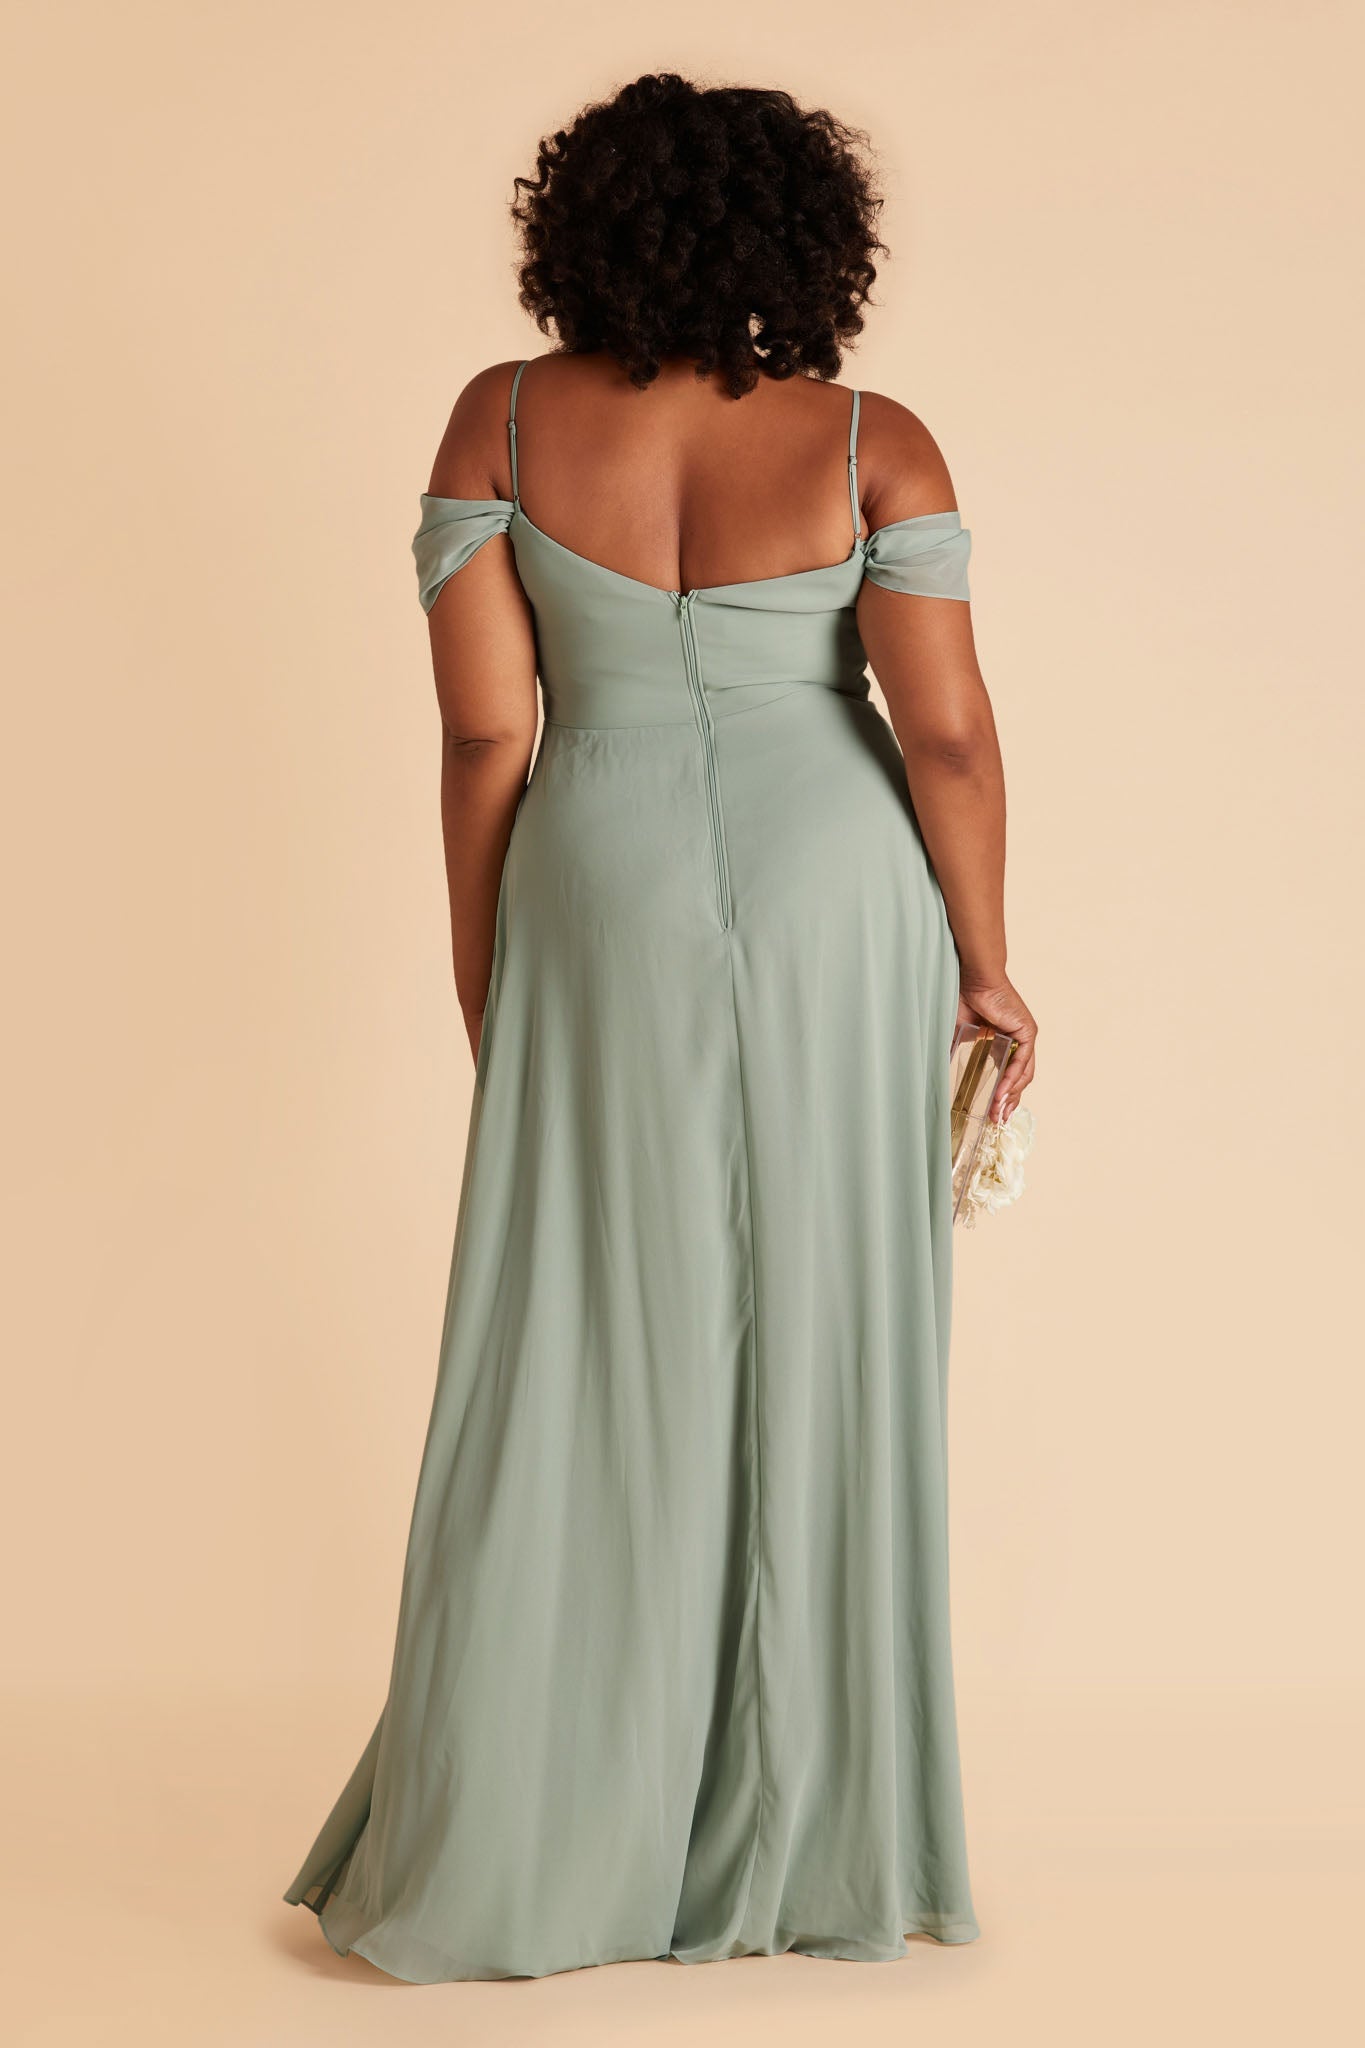 Back view of the floor-length Devin Convertible Plus Size Bridesmaid Dress features a fitted bust and waist with a flowing skirt that moves with the model.